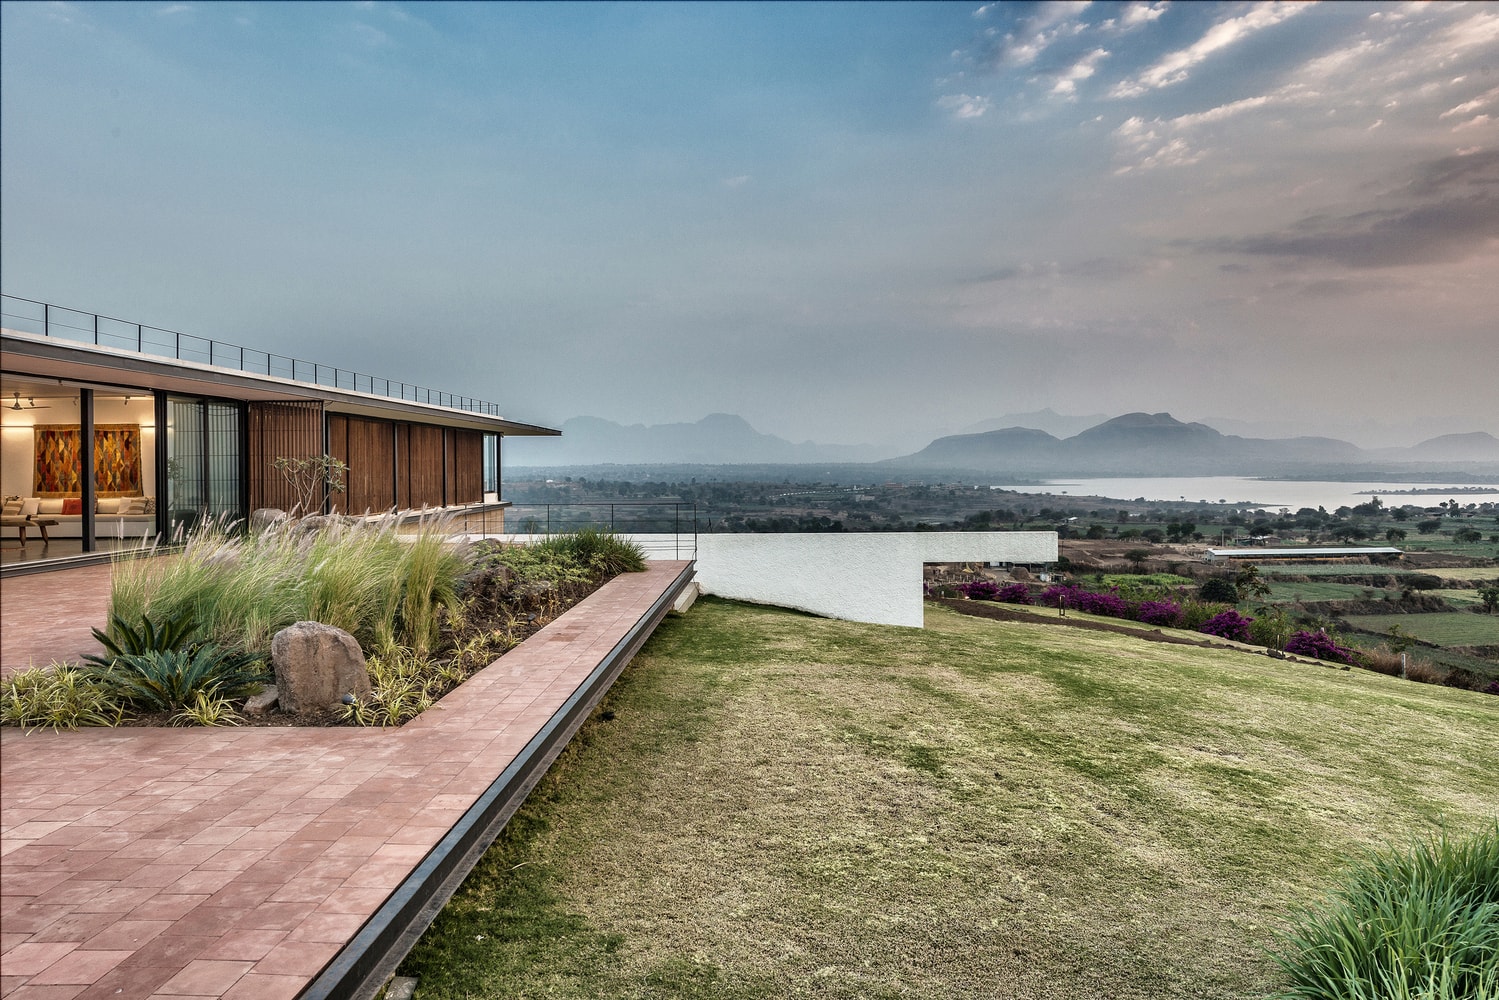 House With The Soaring Rock Spasm Design Architecture Traditional Cultural Interior Exterior Garden Swimming Pool Landscape View Mountains Sea Lake Alibag India Inspiration